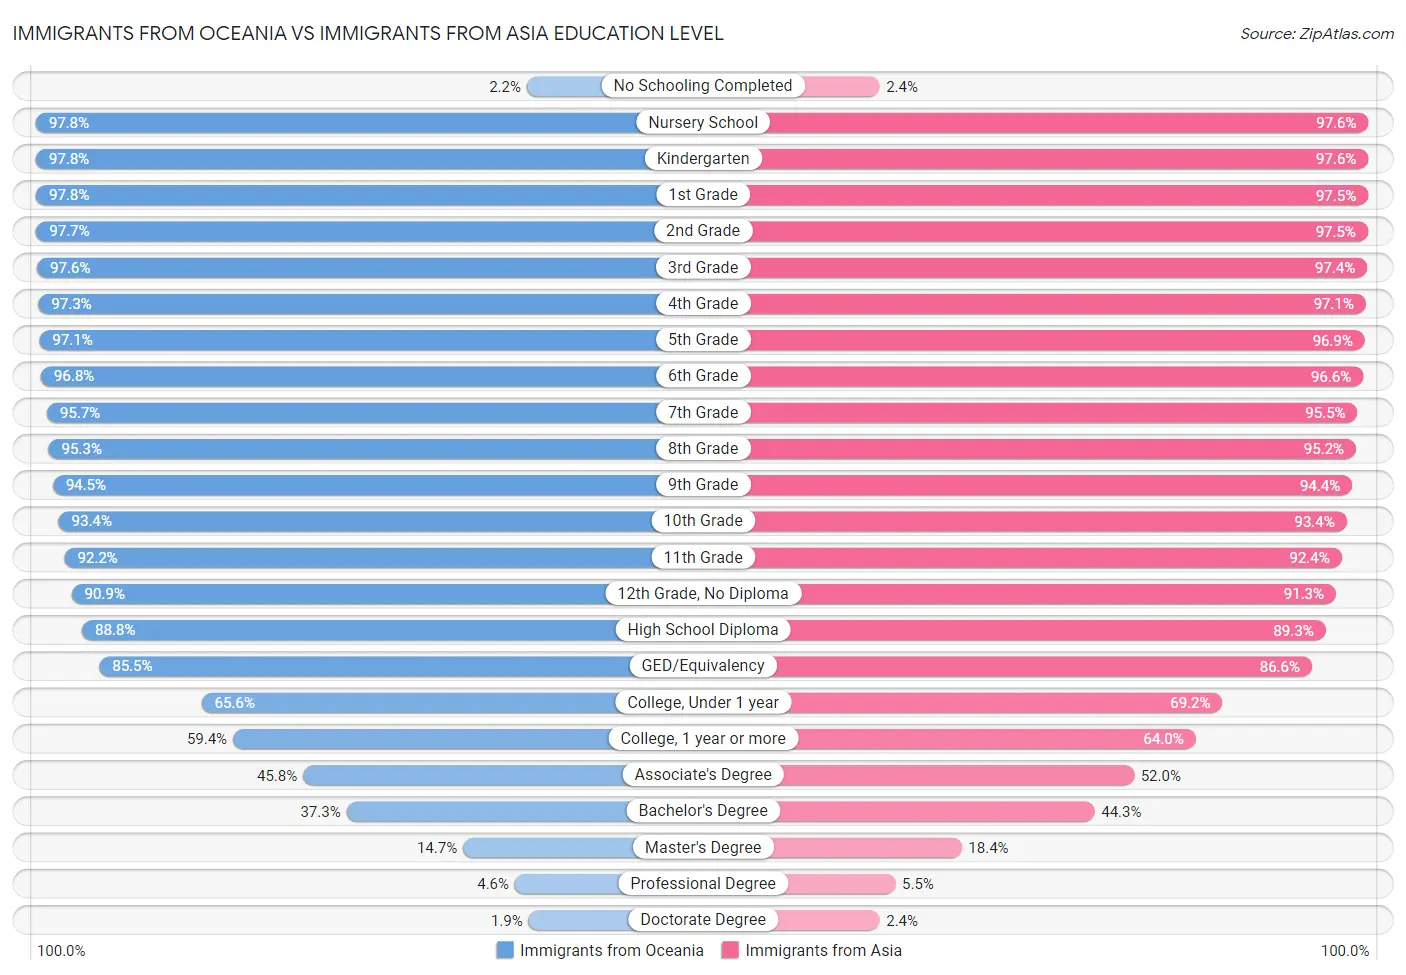 Immigrants from Oceania vs Immigrants from Asia Education Level